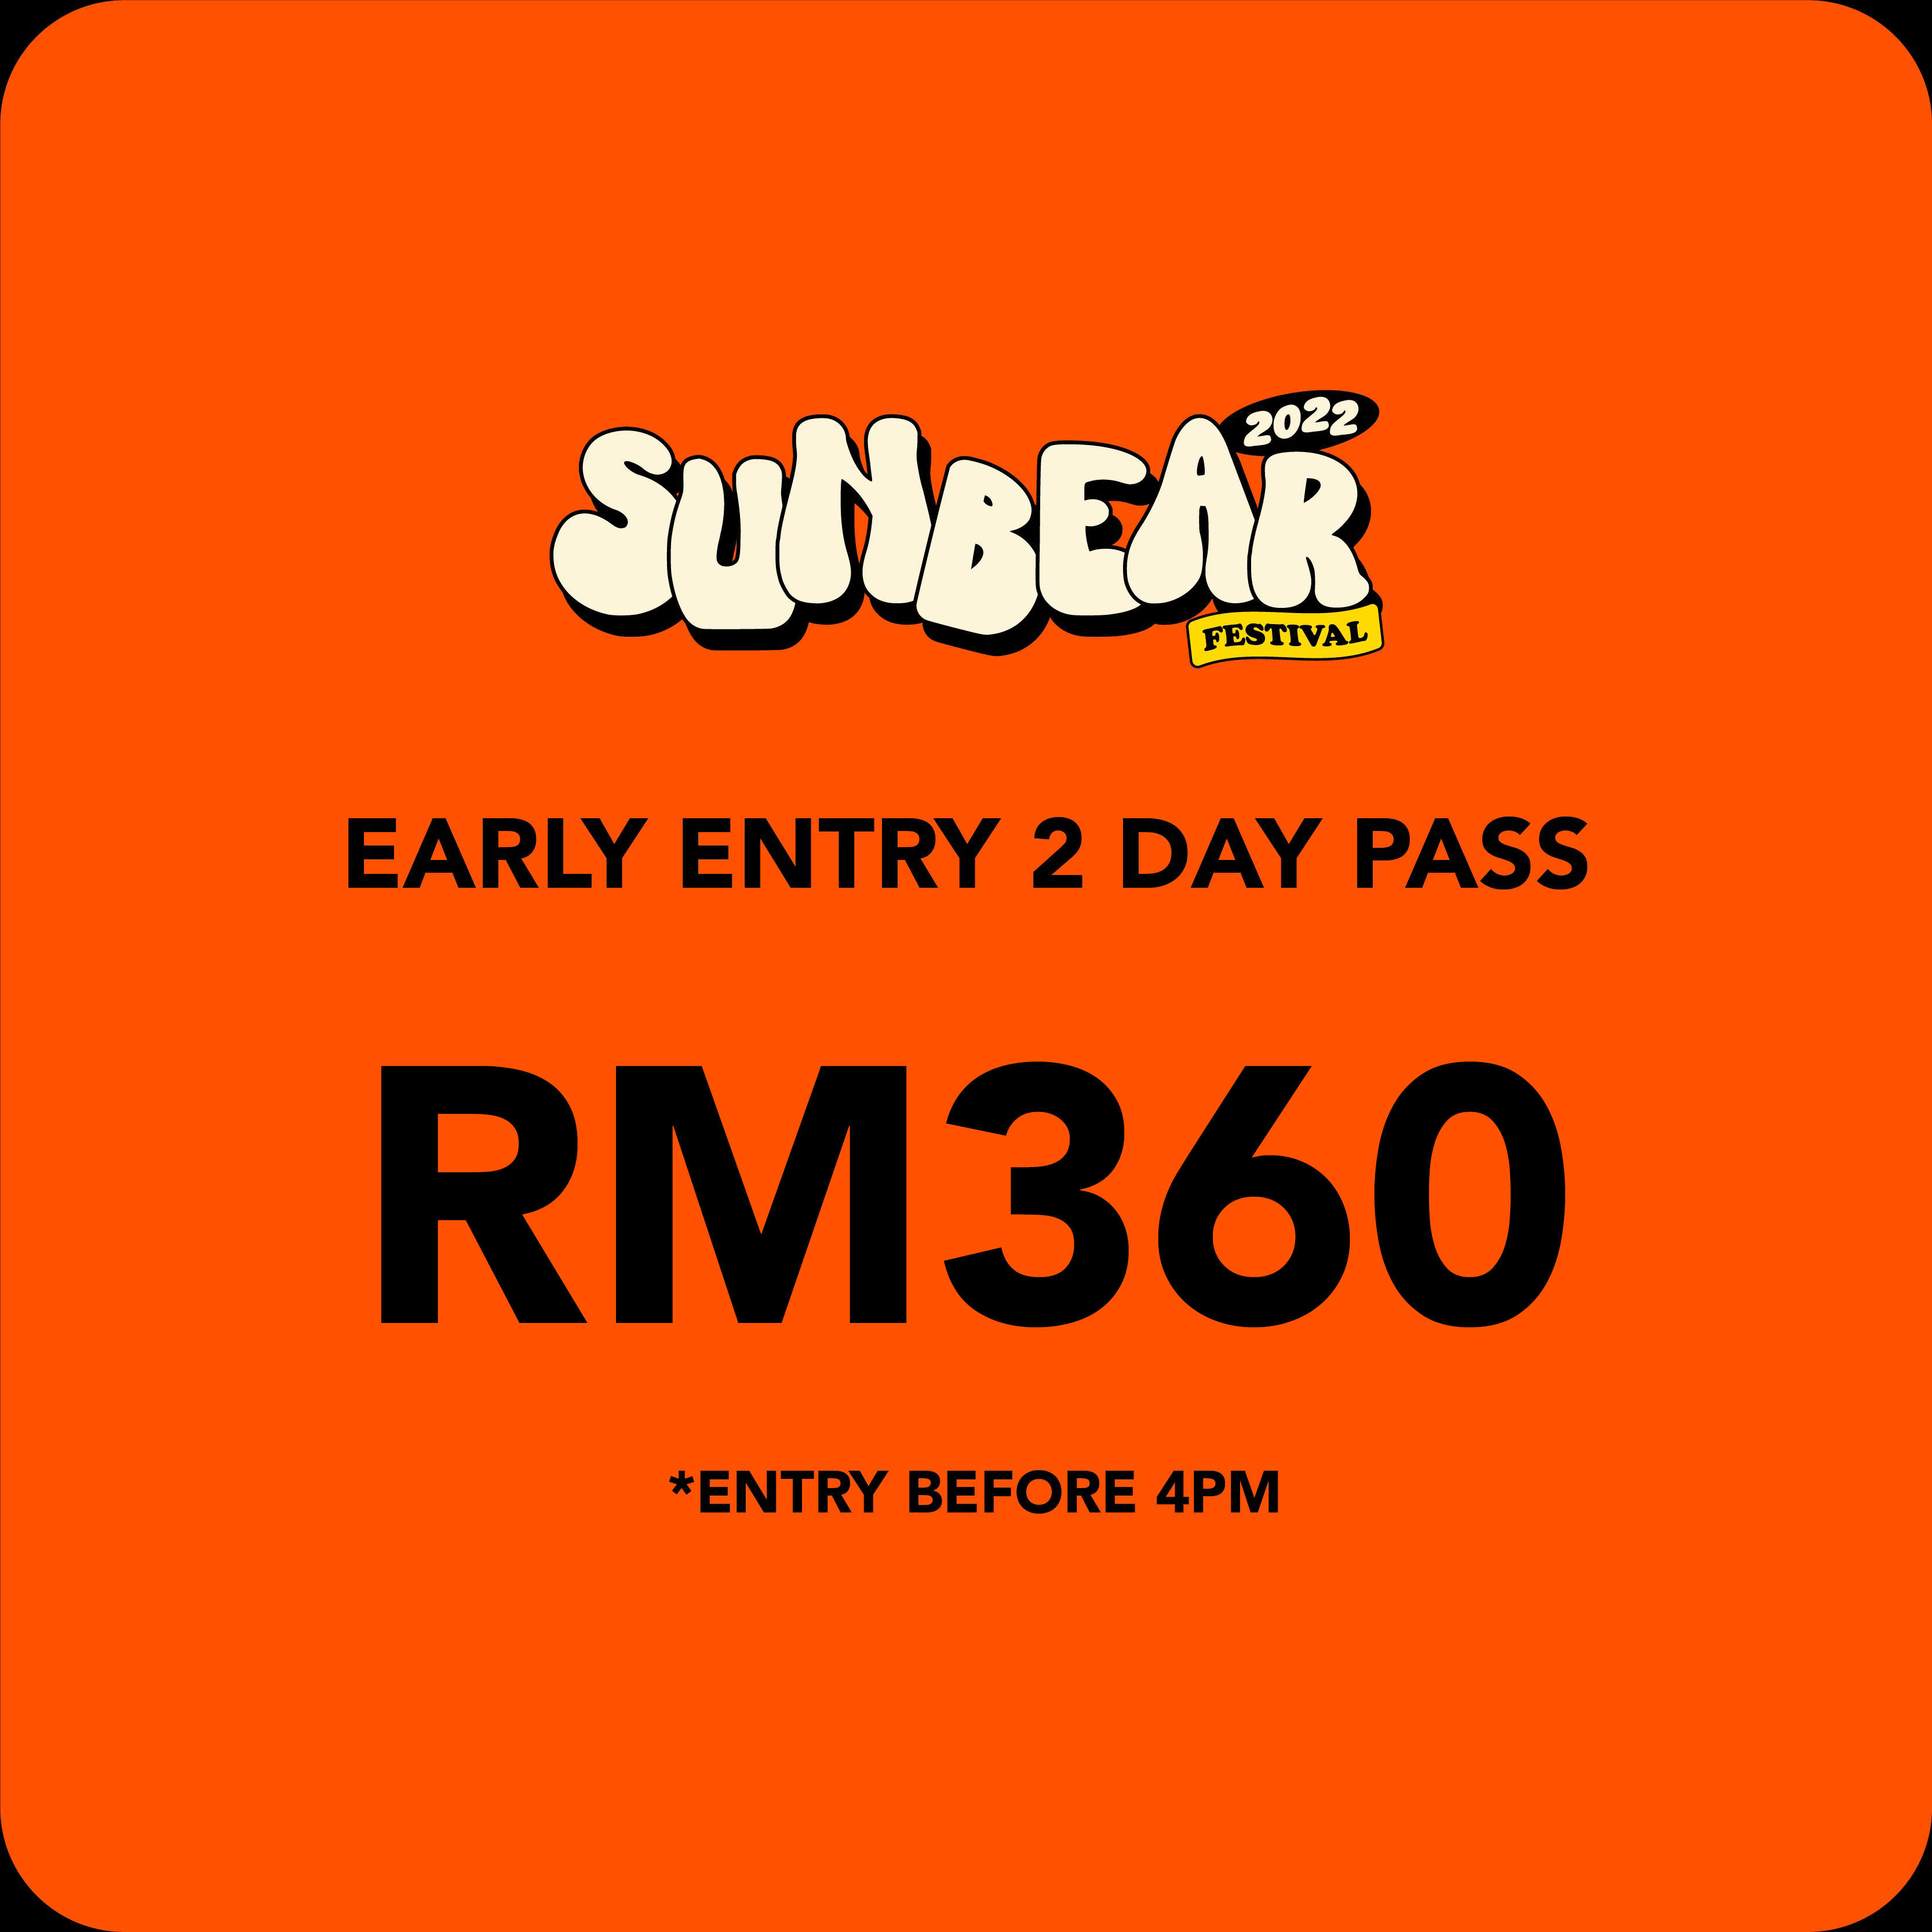 EARLY ENTRY 2 DAY PASS